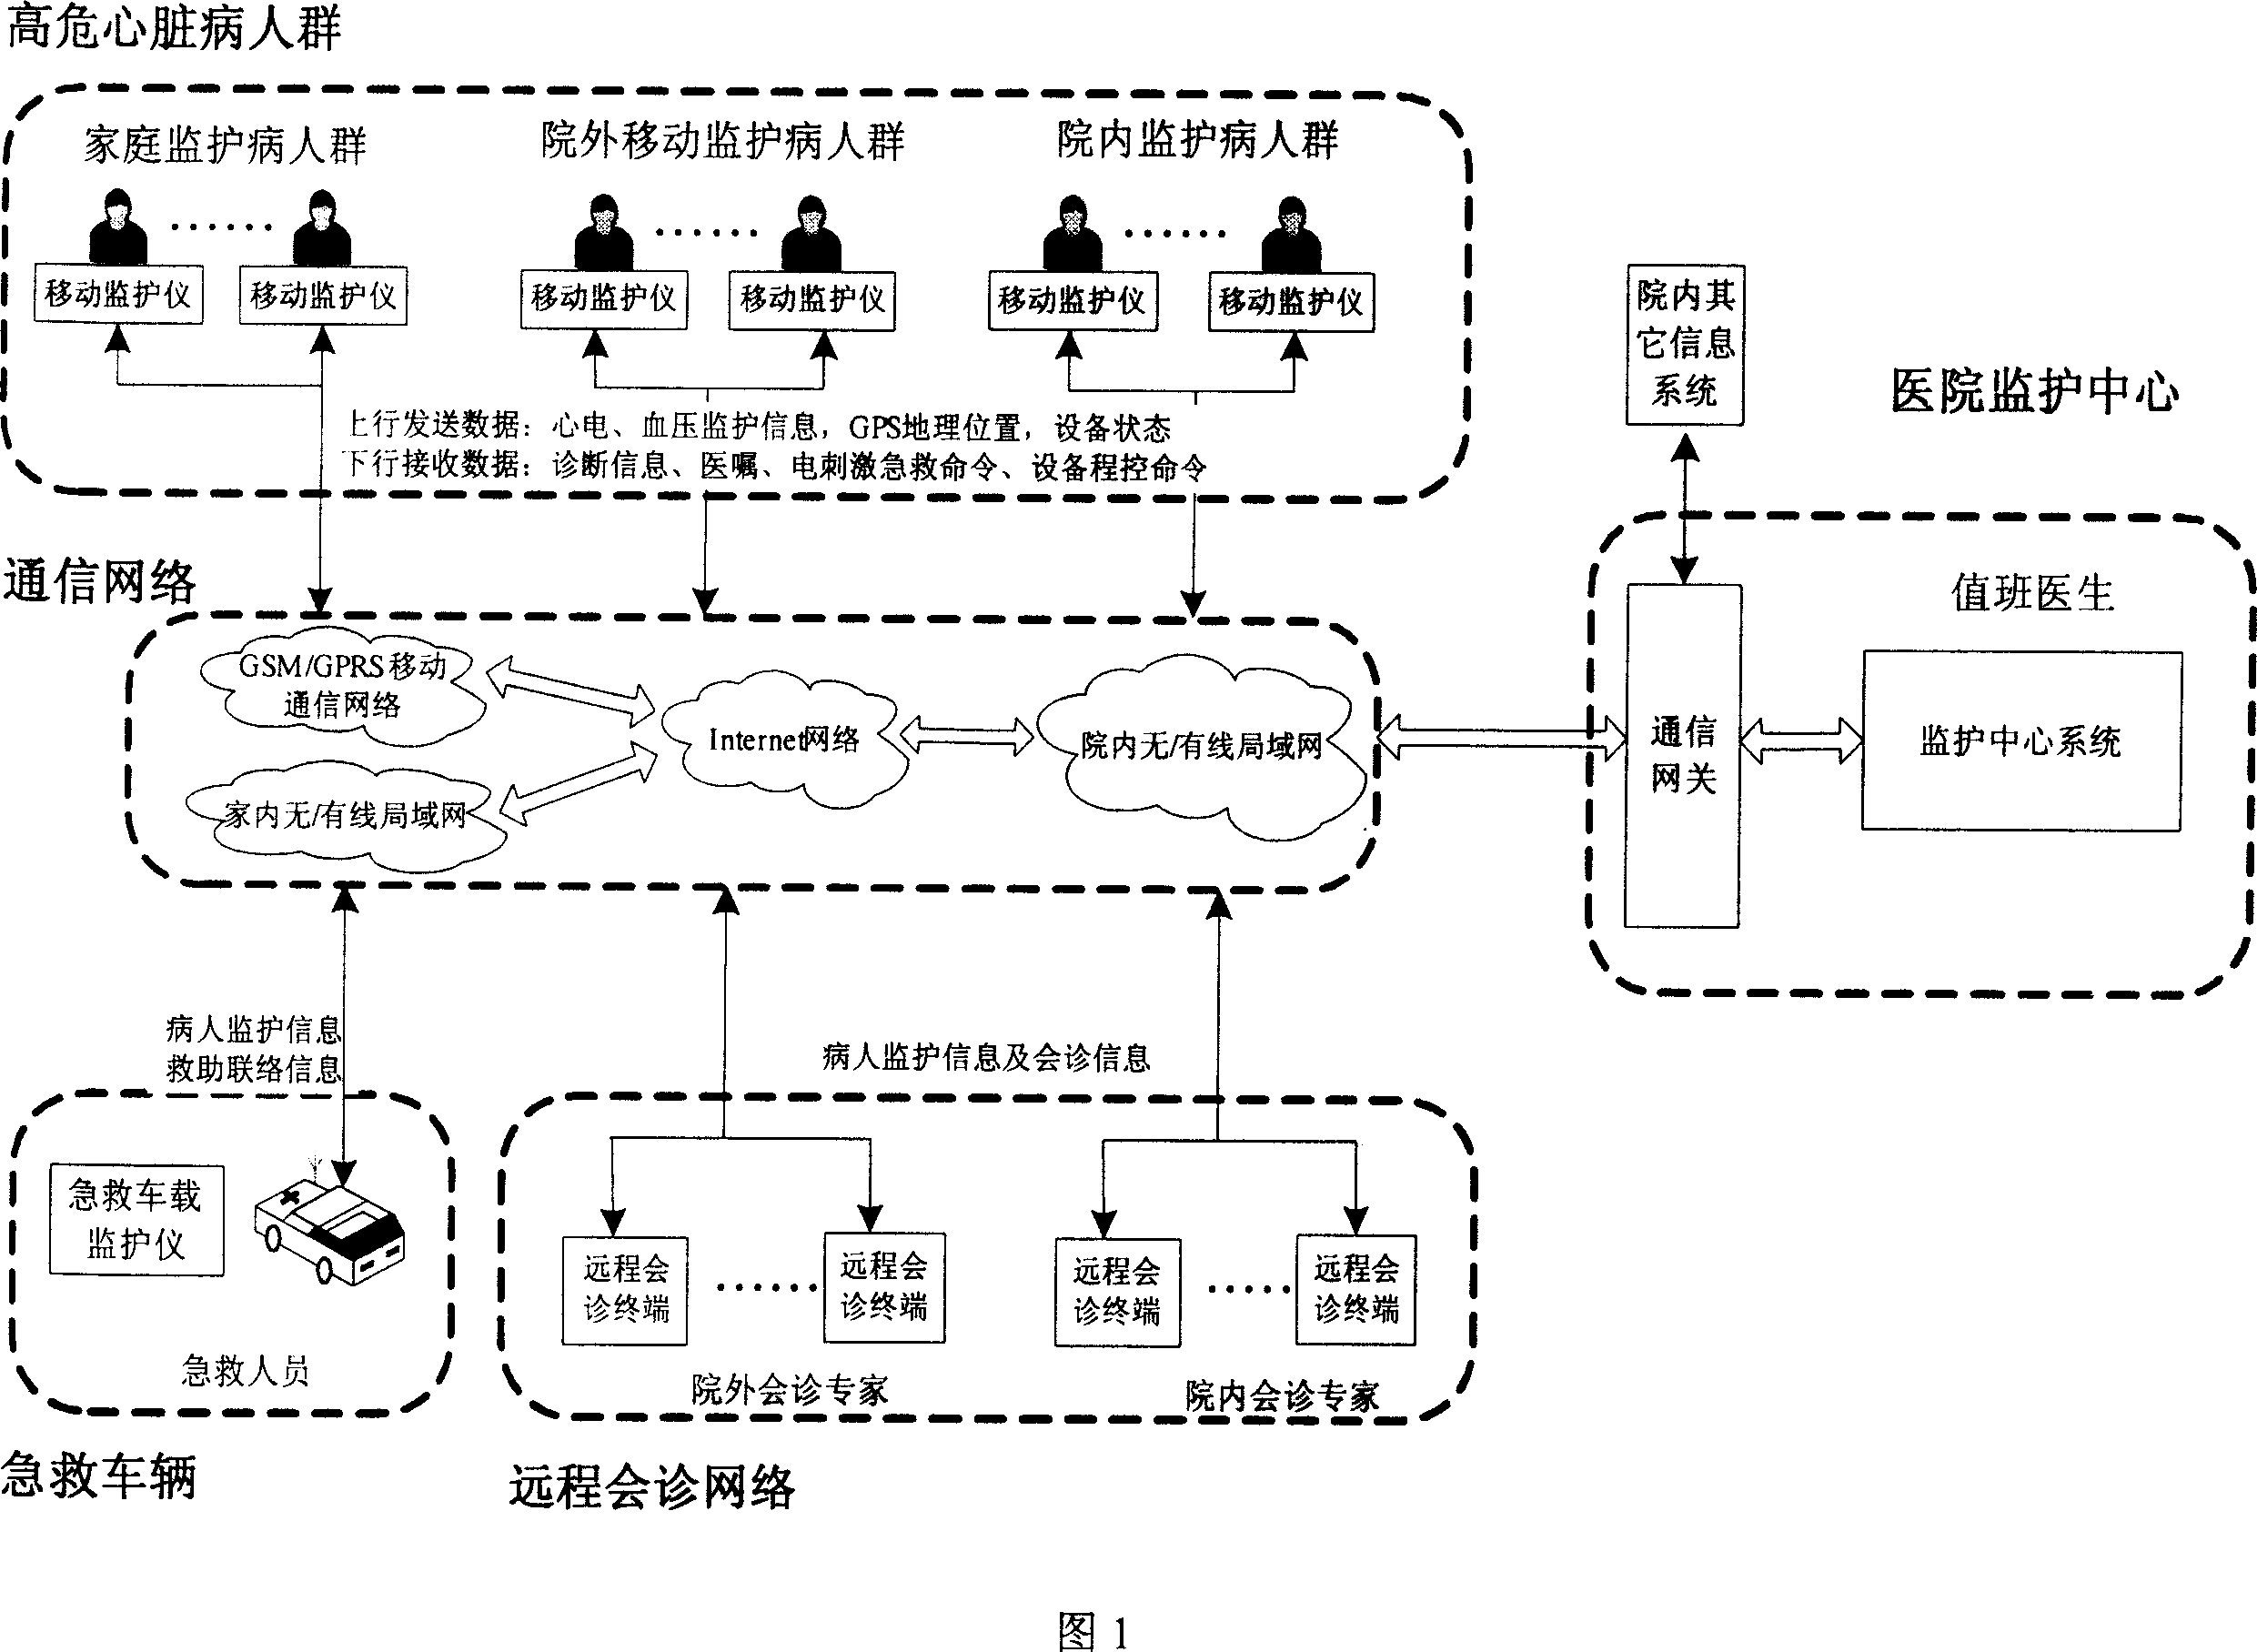 Realtime remote monitoring system for high risk heart disease crowd and integrated control type continuous monitoring method